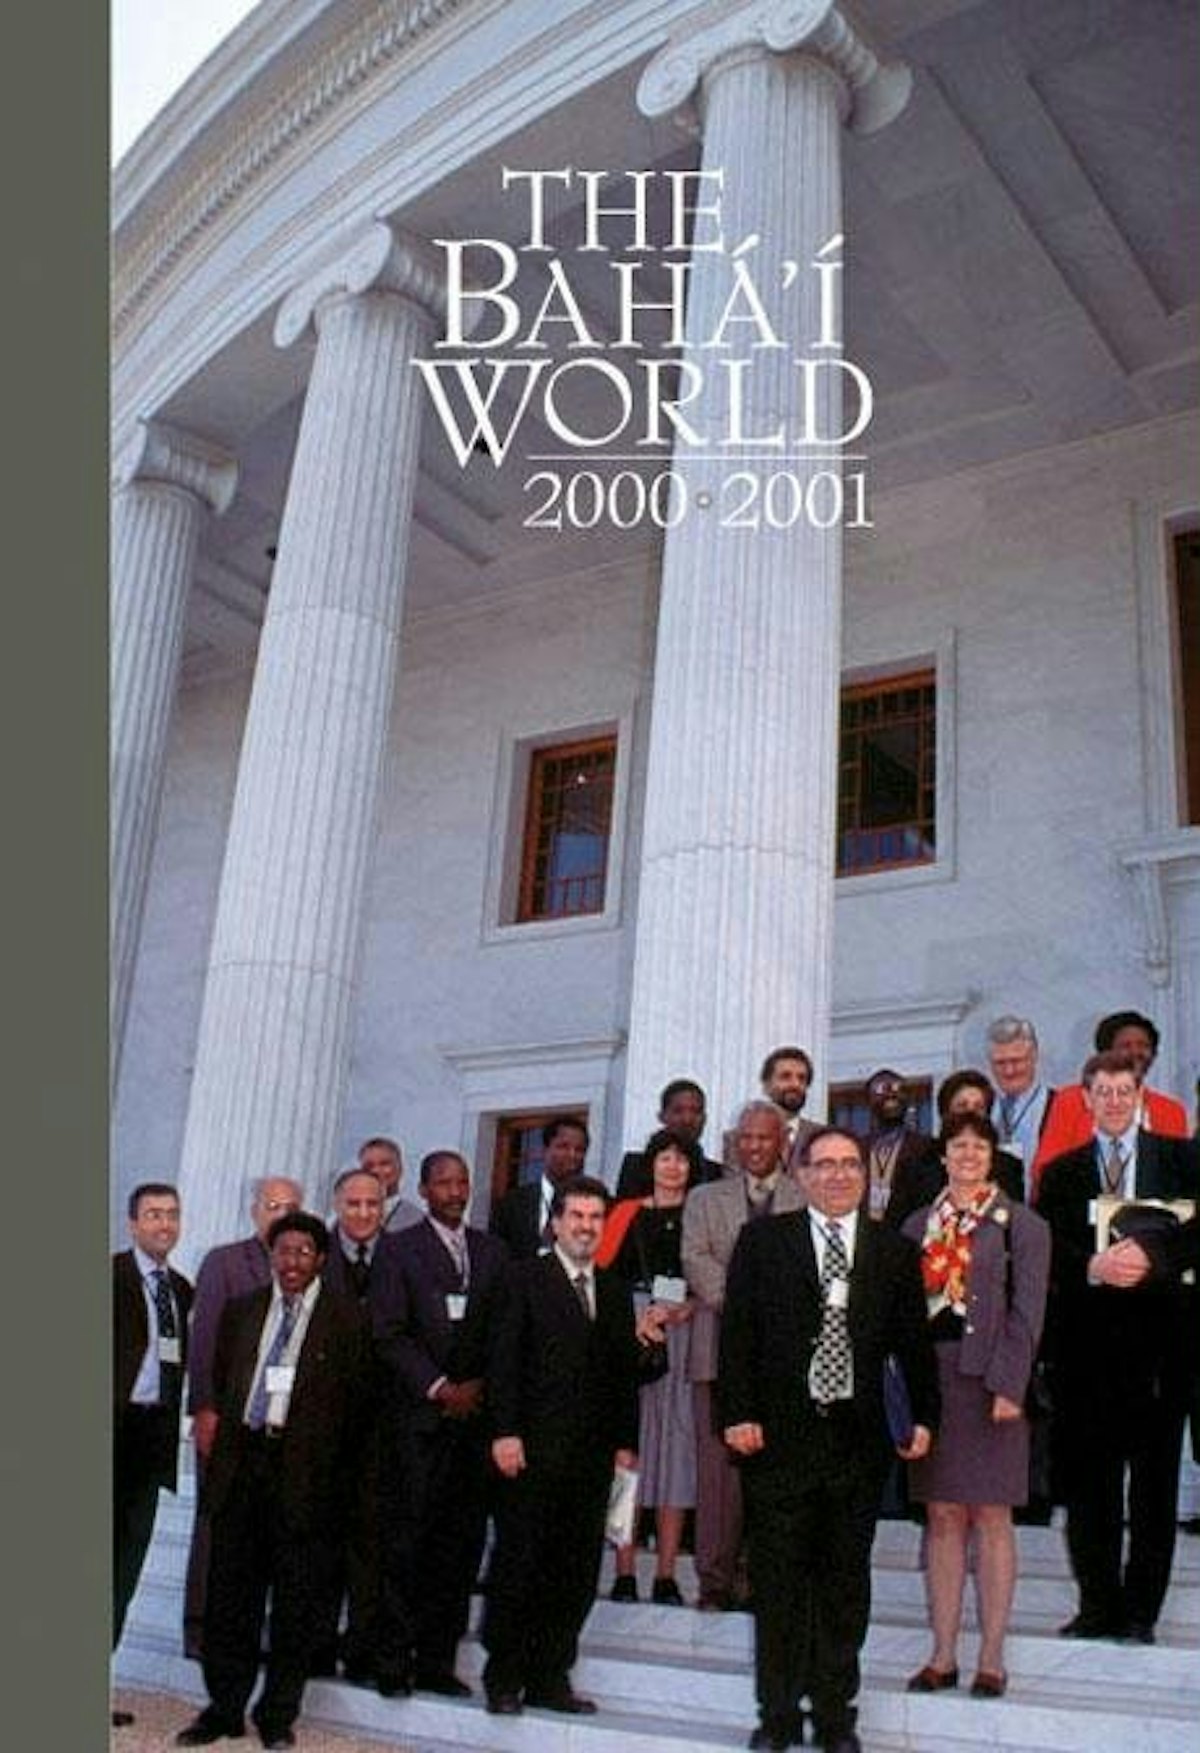 The cover of the latest volume of “The Bahá'í World,” the ninth in an annual series which documents the statements and achievements of the Bahá'í International Community.